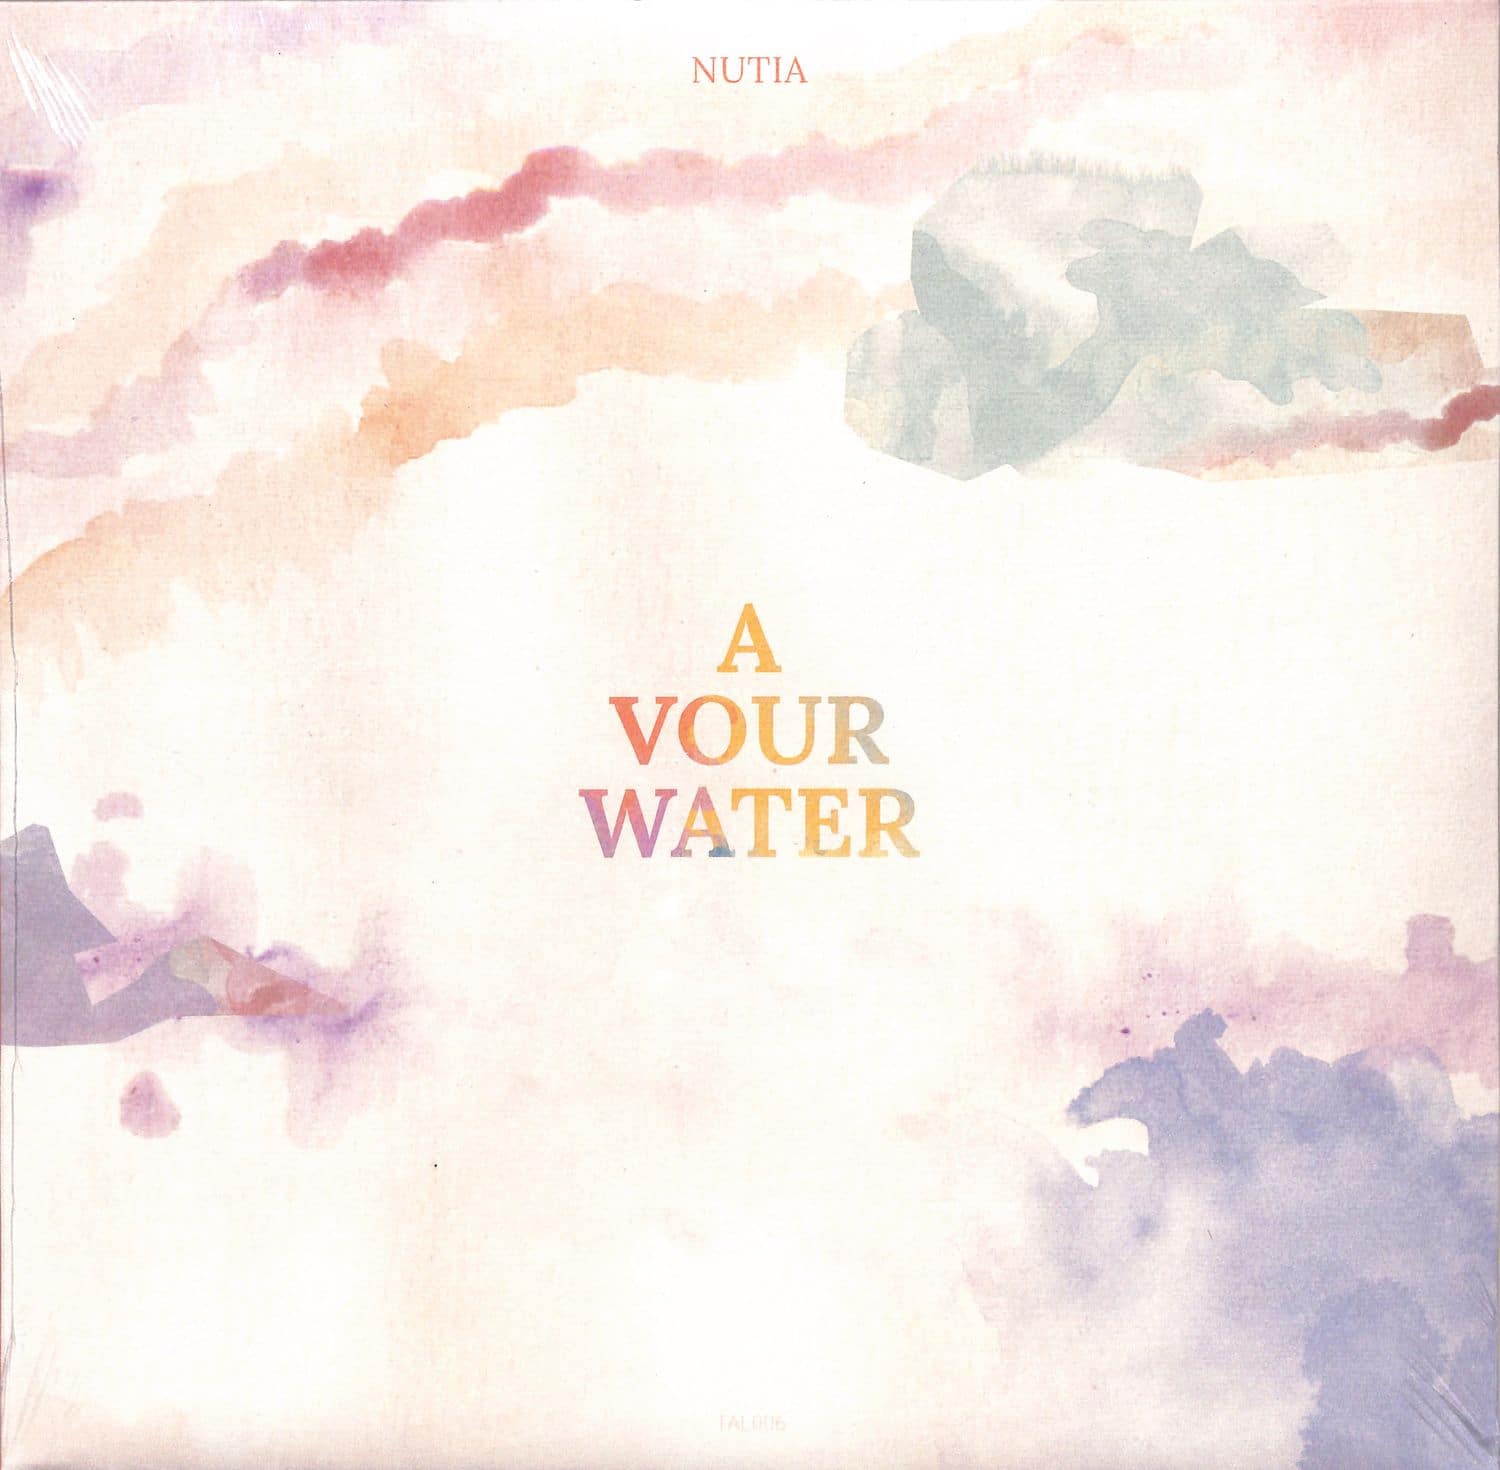 Nutia - A VOUR WATER